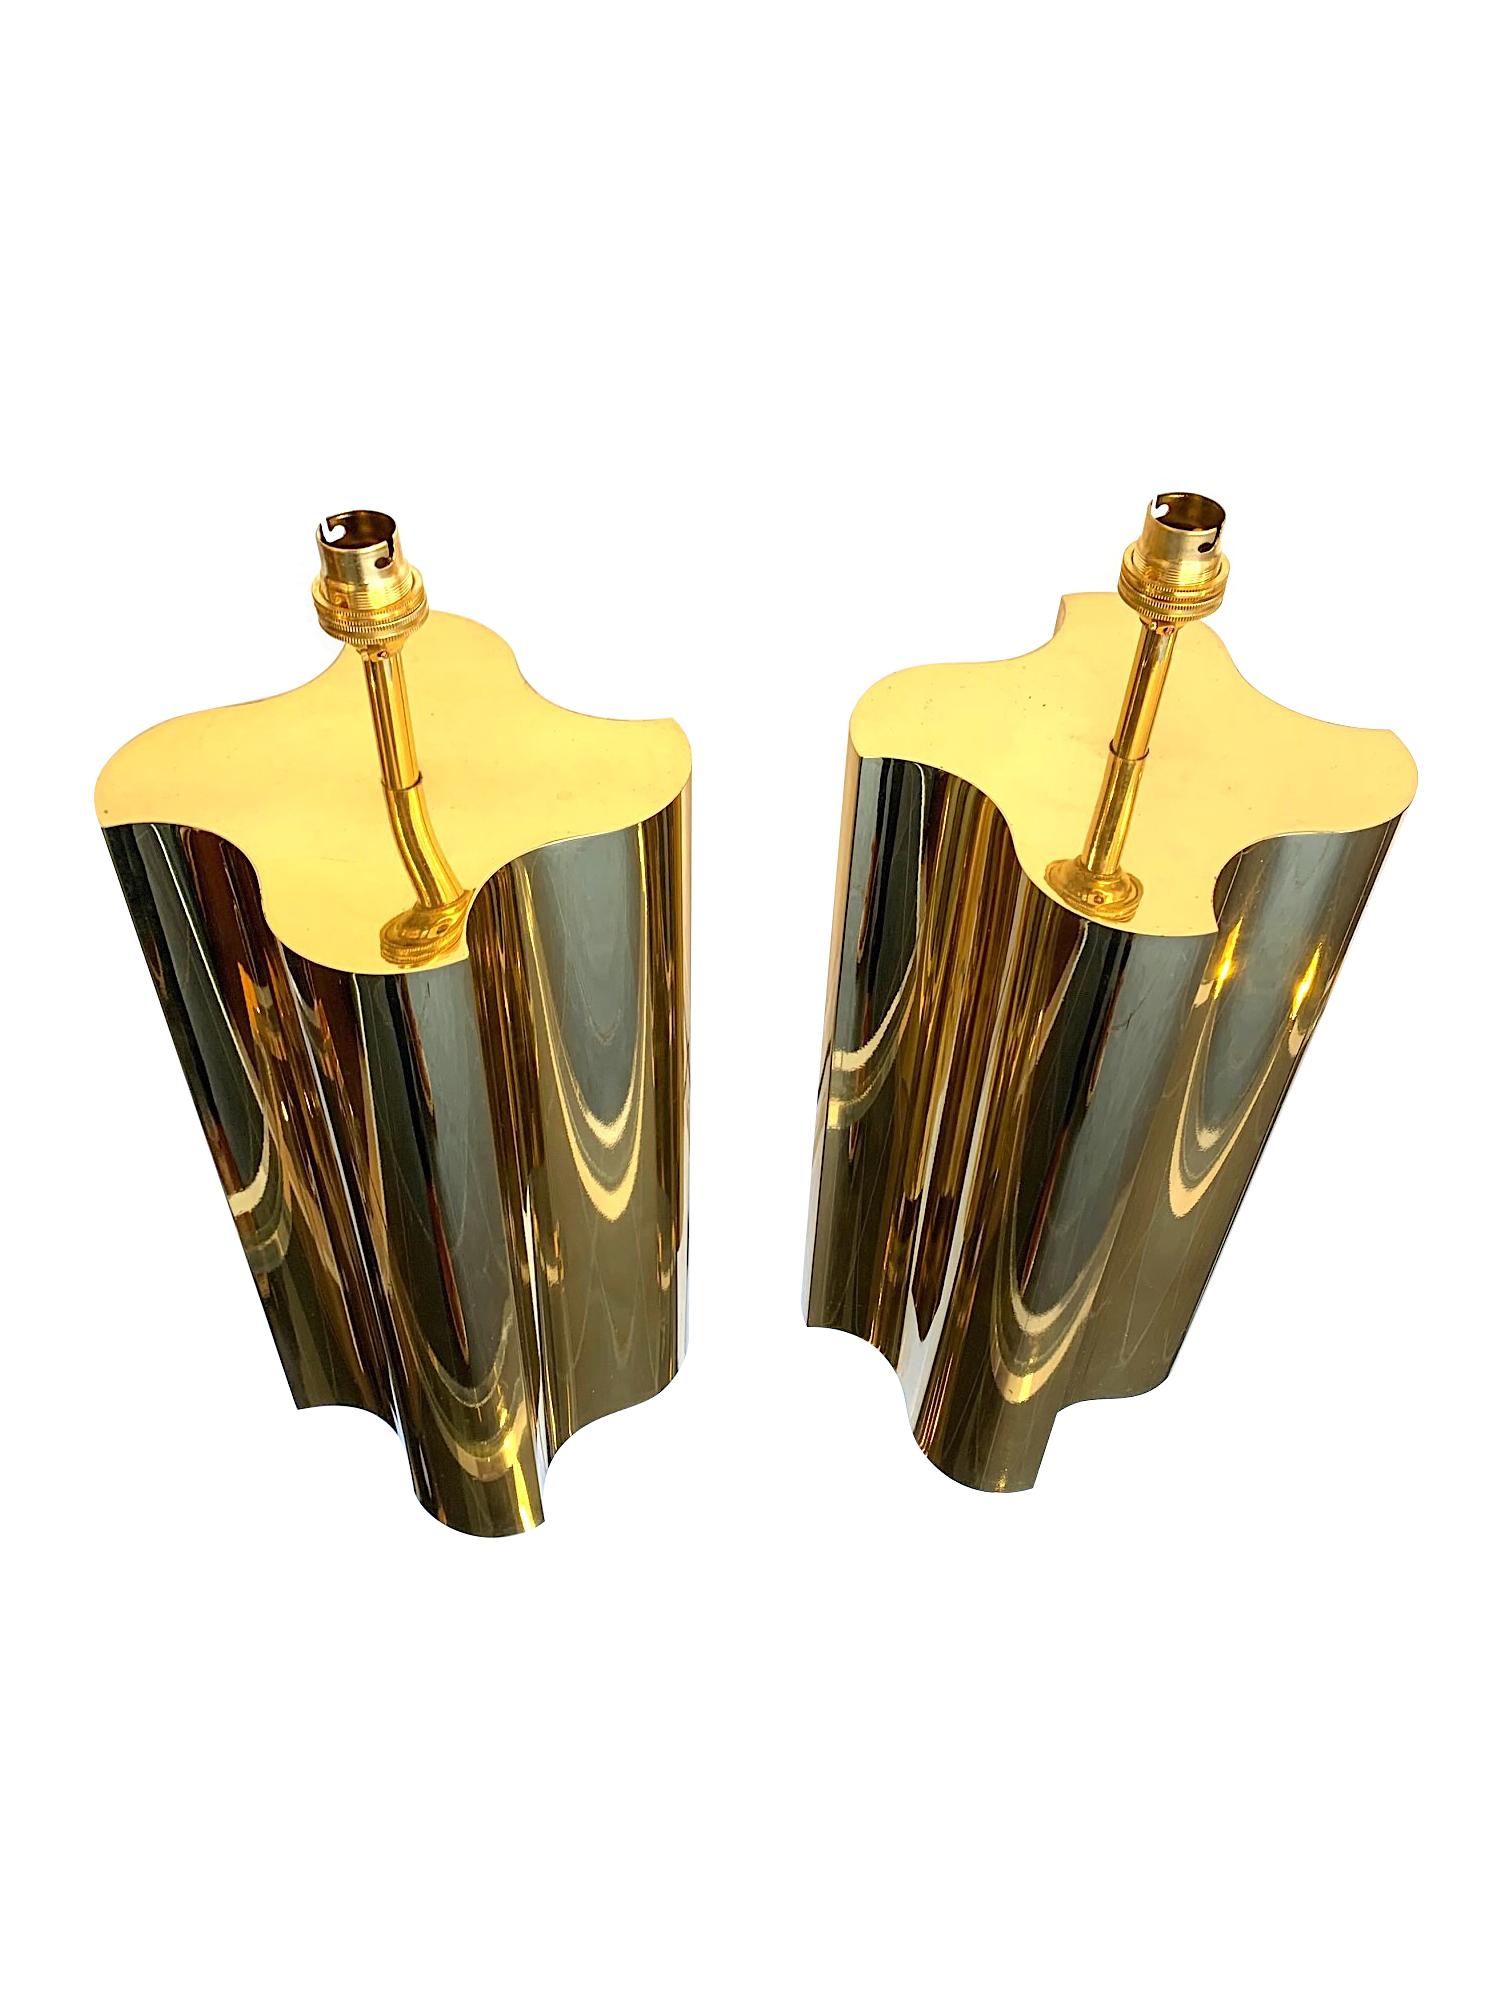 Late 20th Century Pair of Large 1970s Brass Lamps with Interesting Curved Corners and New Shades